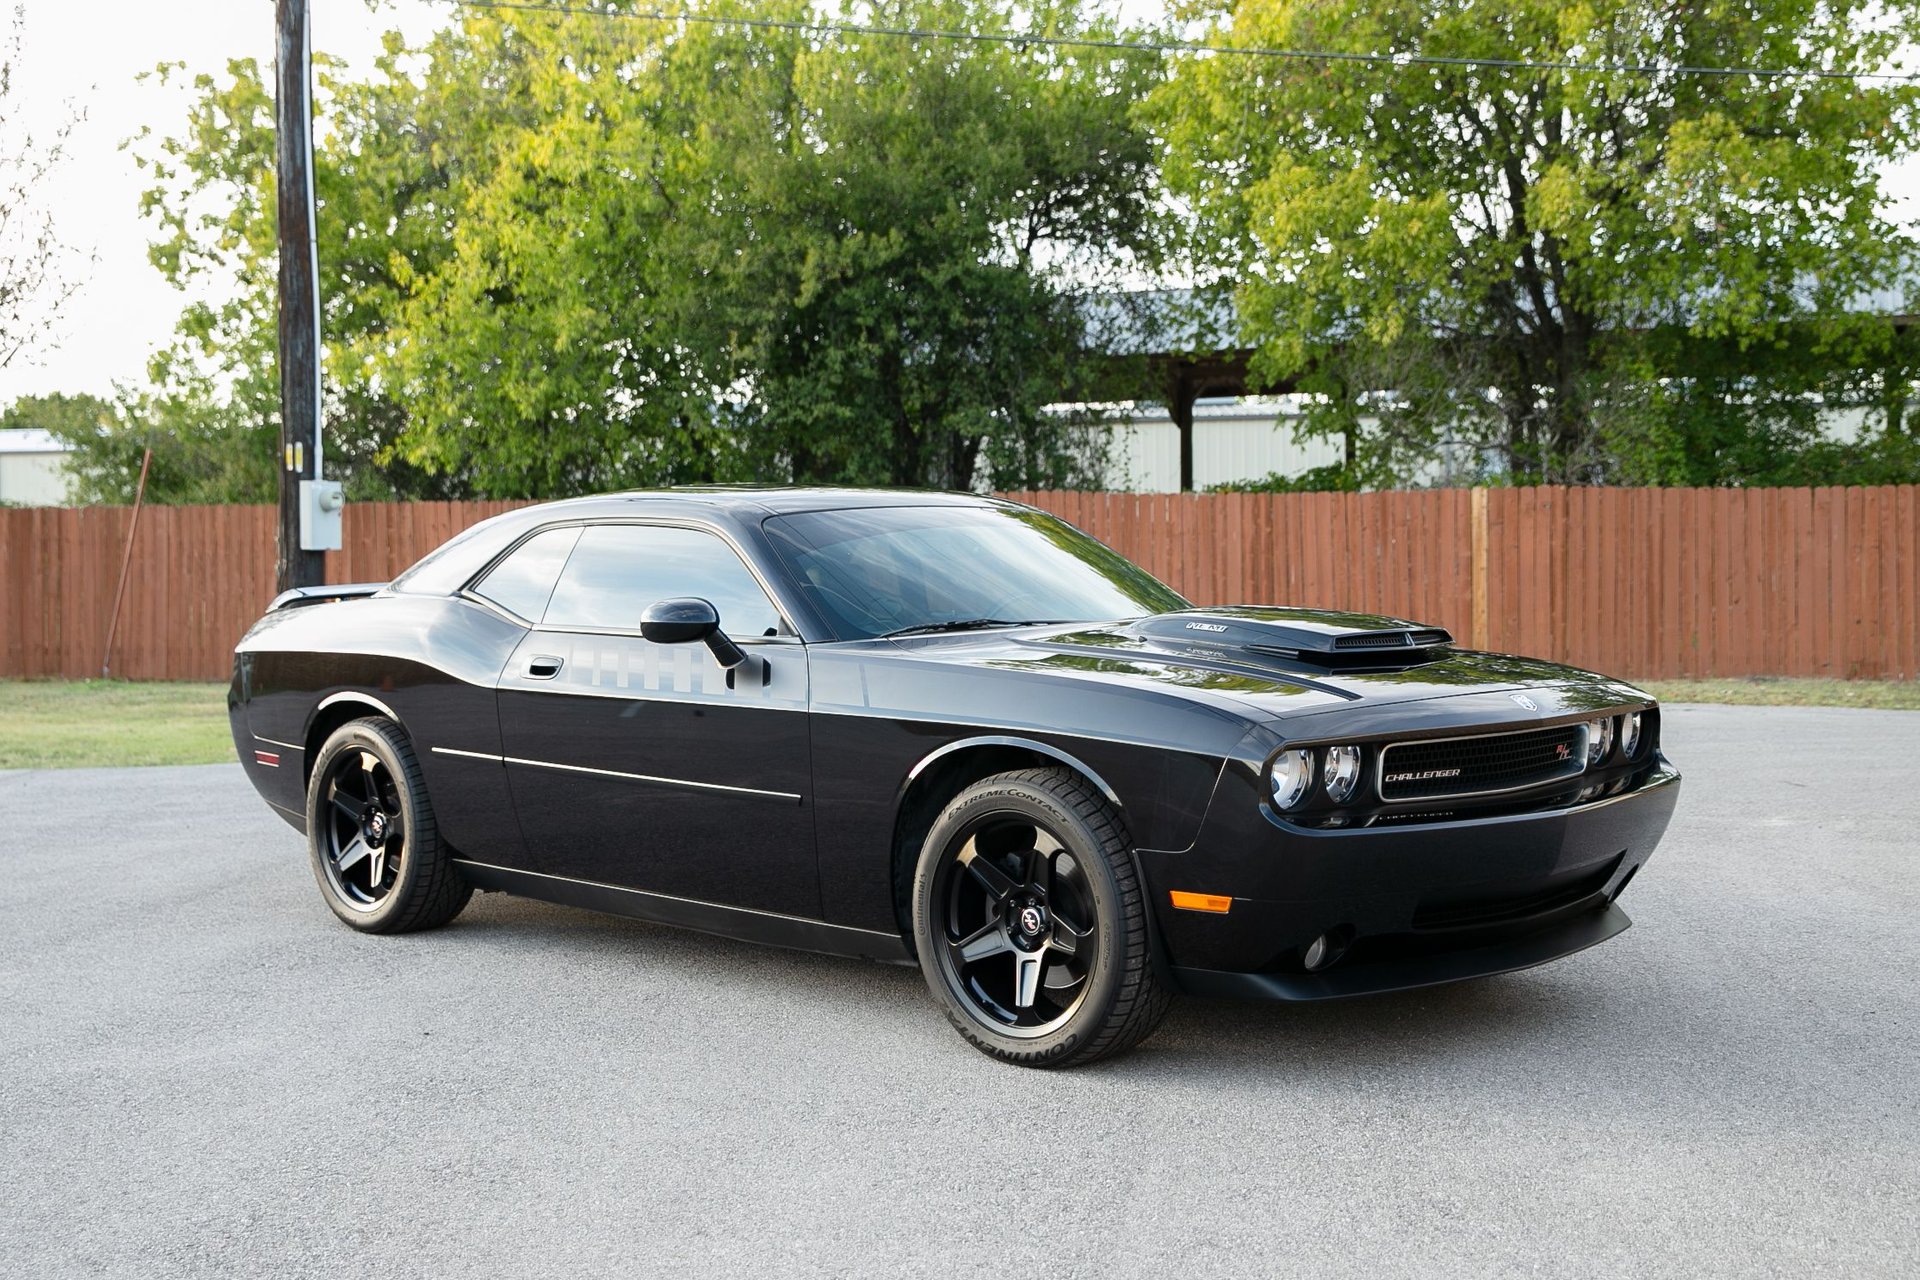 2010 Dodge Challenger R/T | American Muscle CarZ